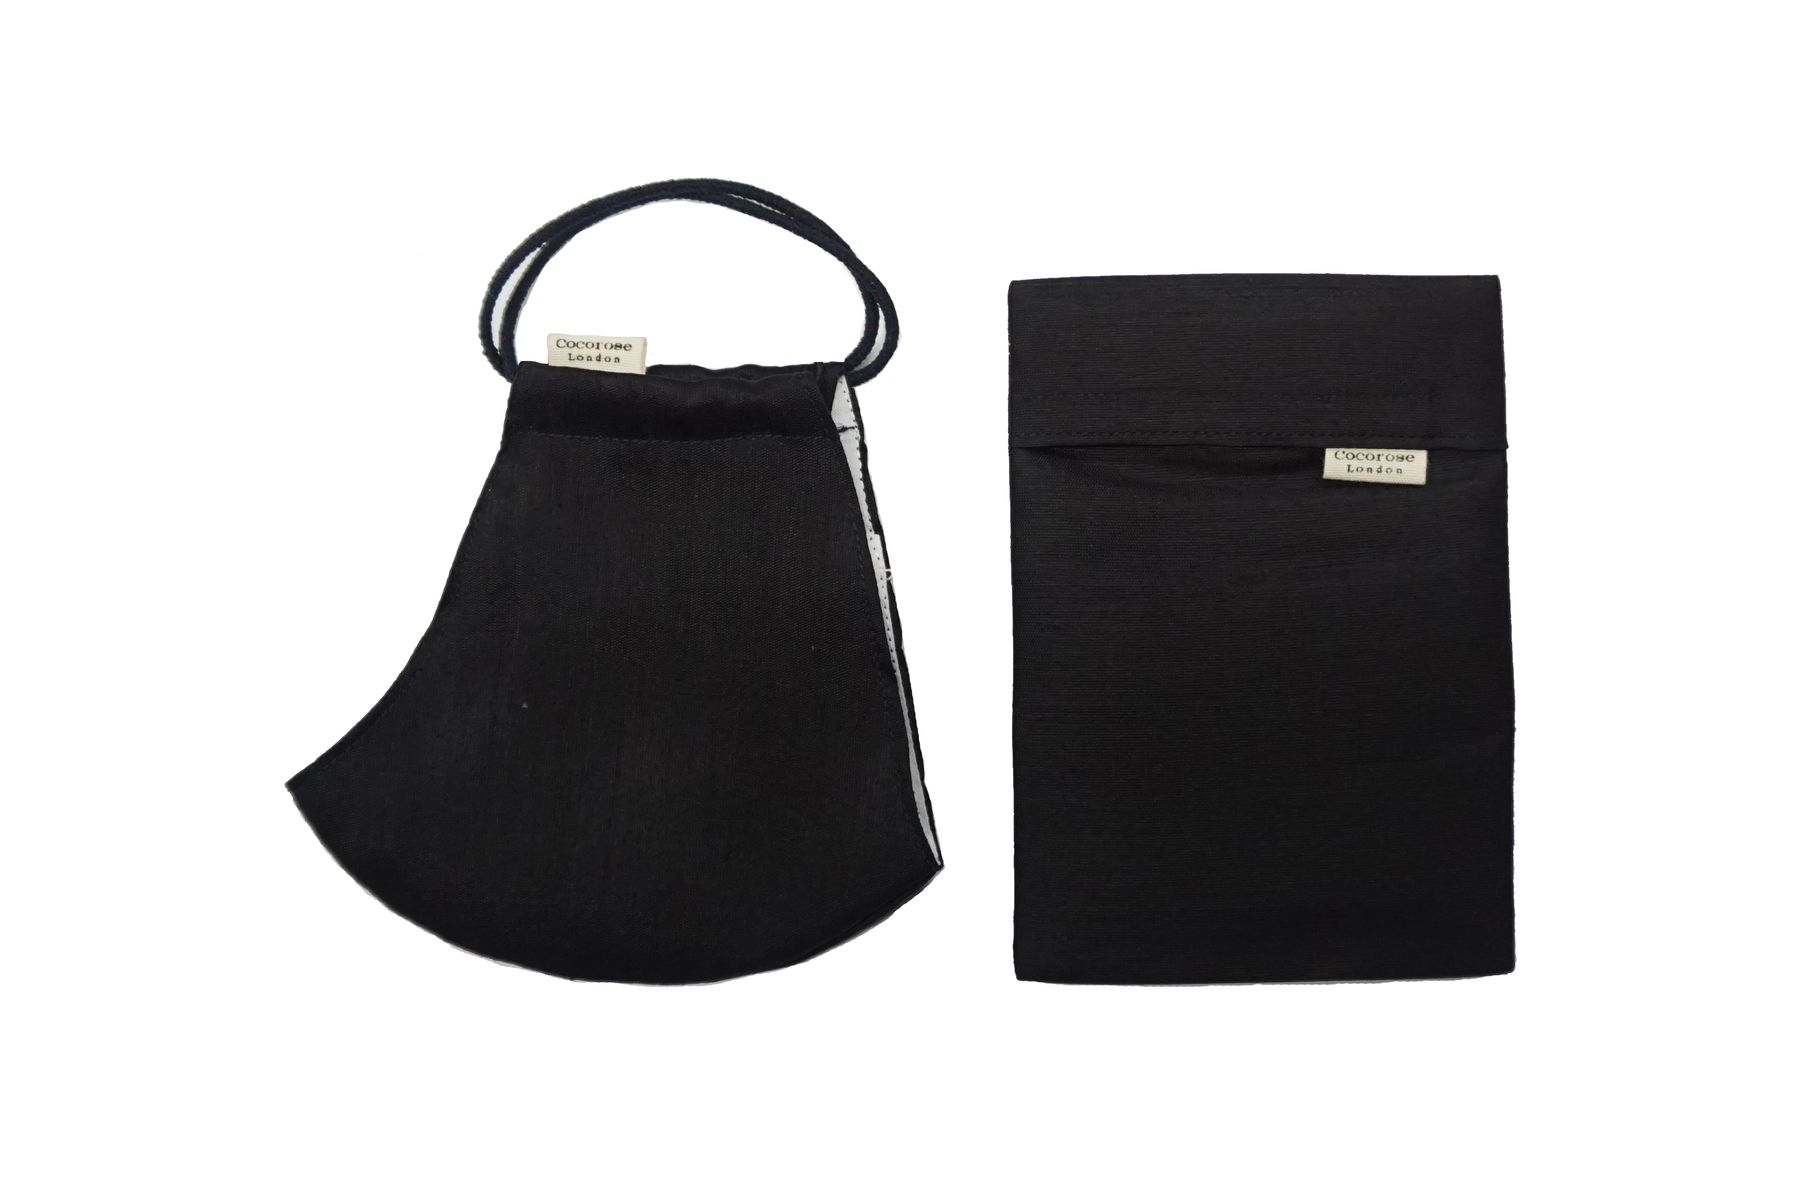 Black silk face mask and matching pouch, from Cocorose London